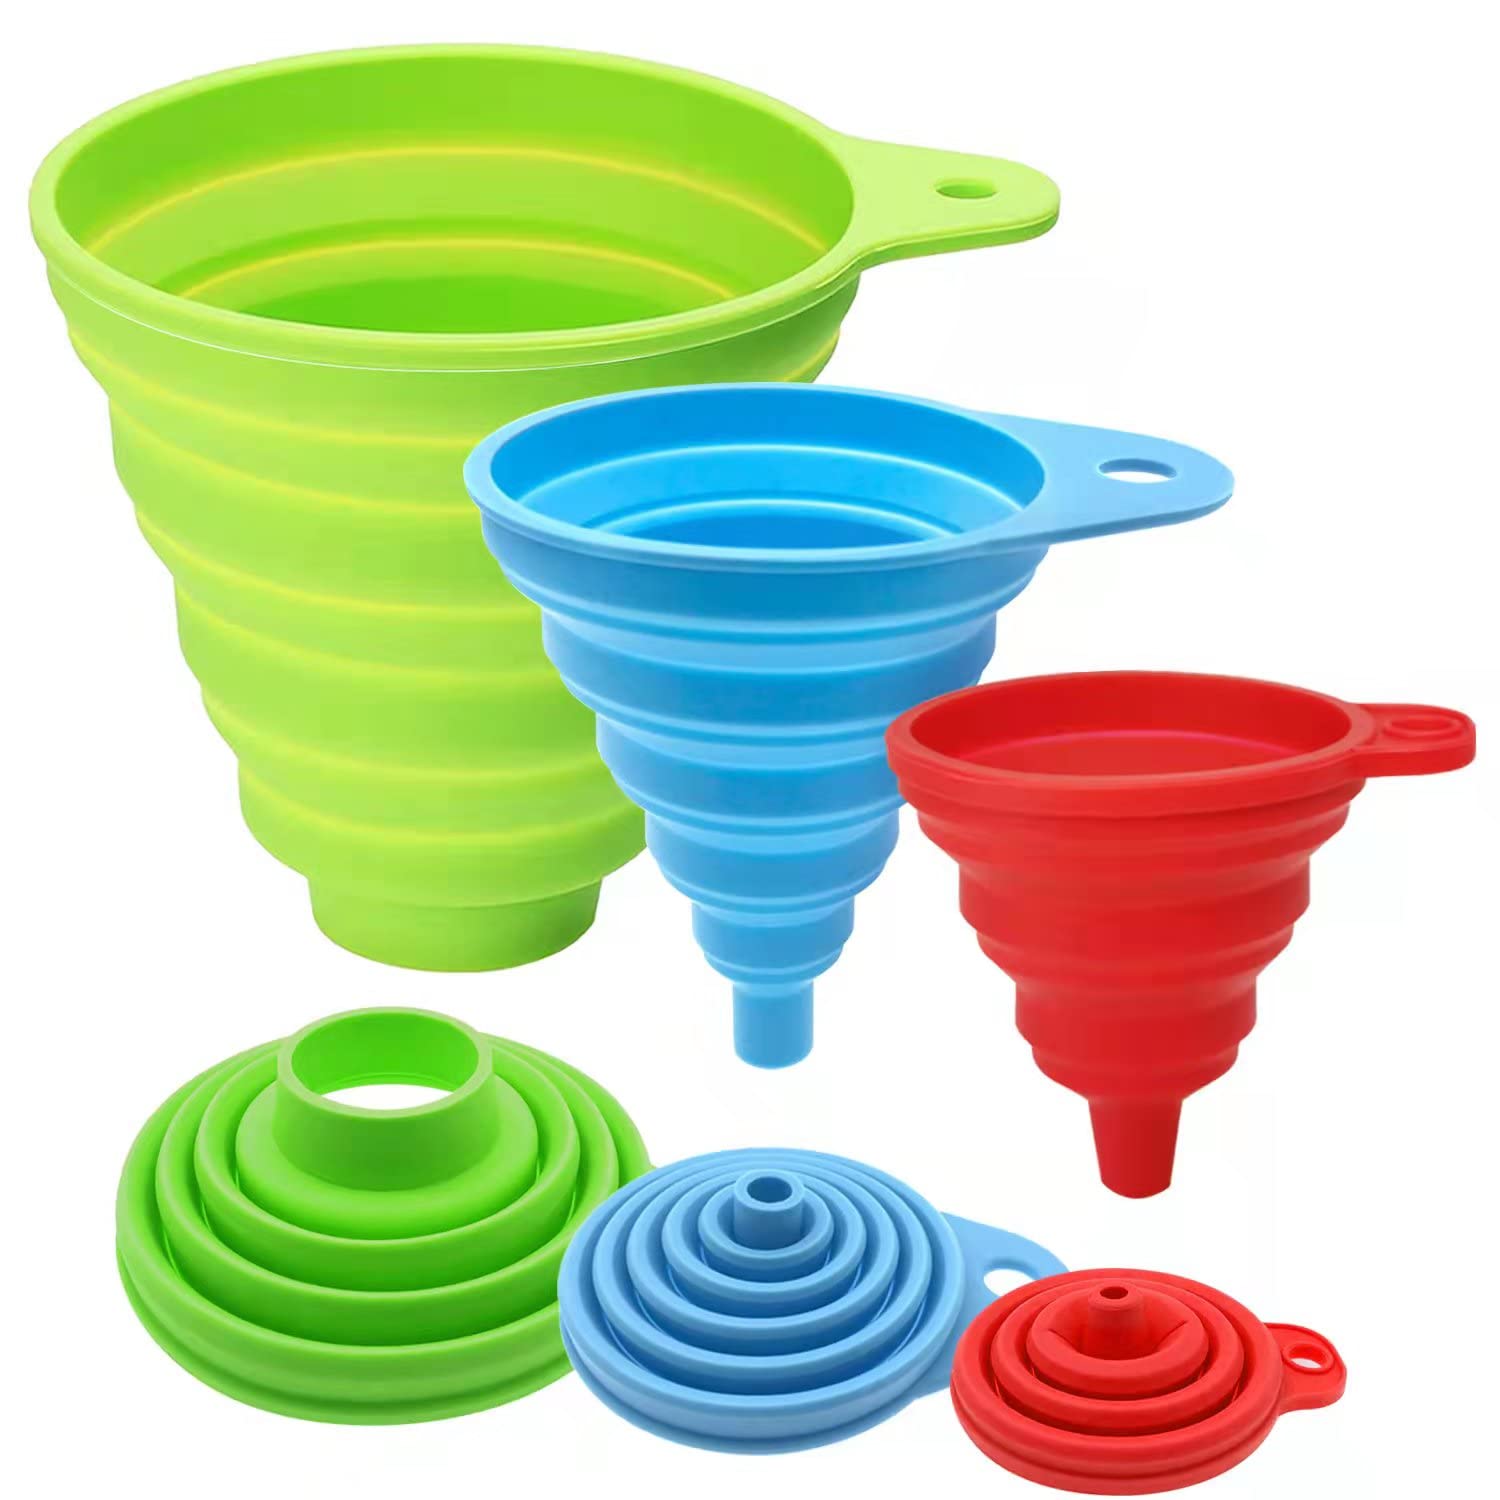 NALSISLO Stain-Resistant Wide Mouth Silicone Funnels, 3-Piece